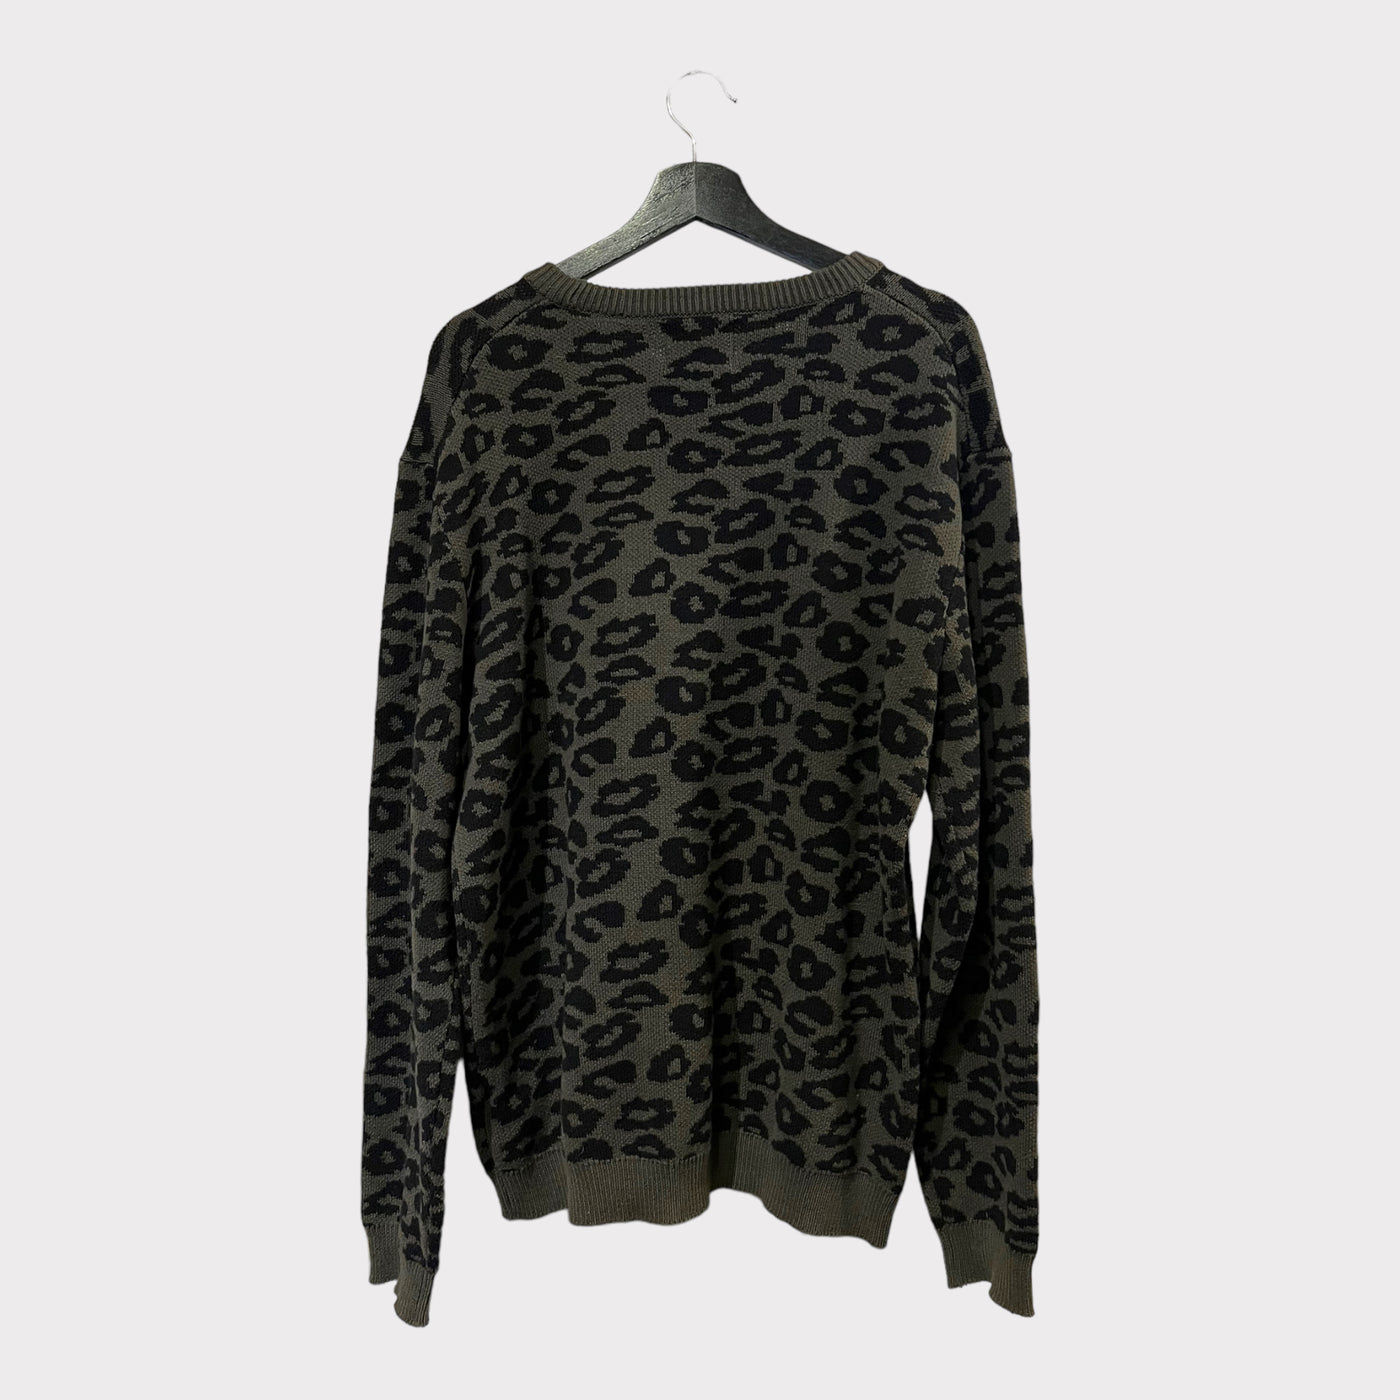 Knitted sweater in leopard print